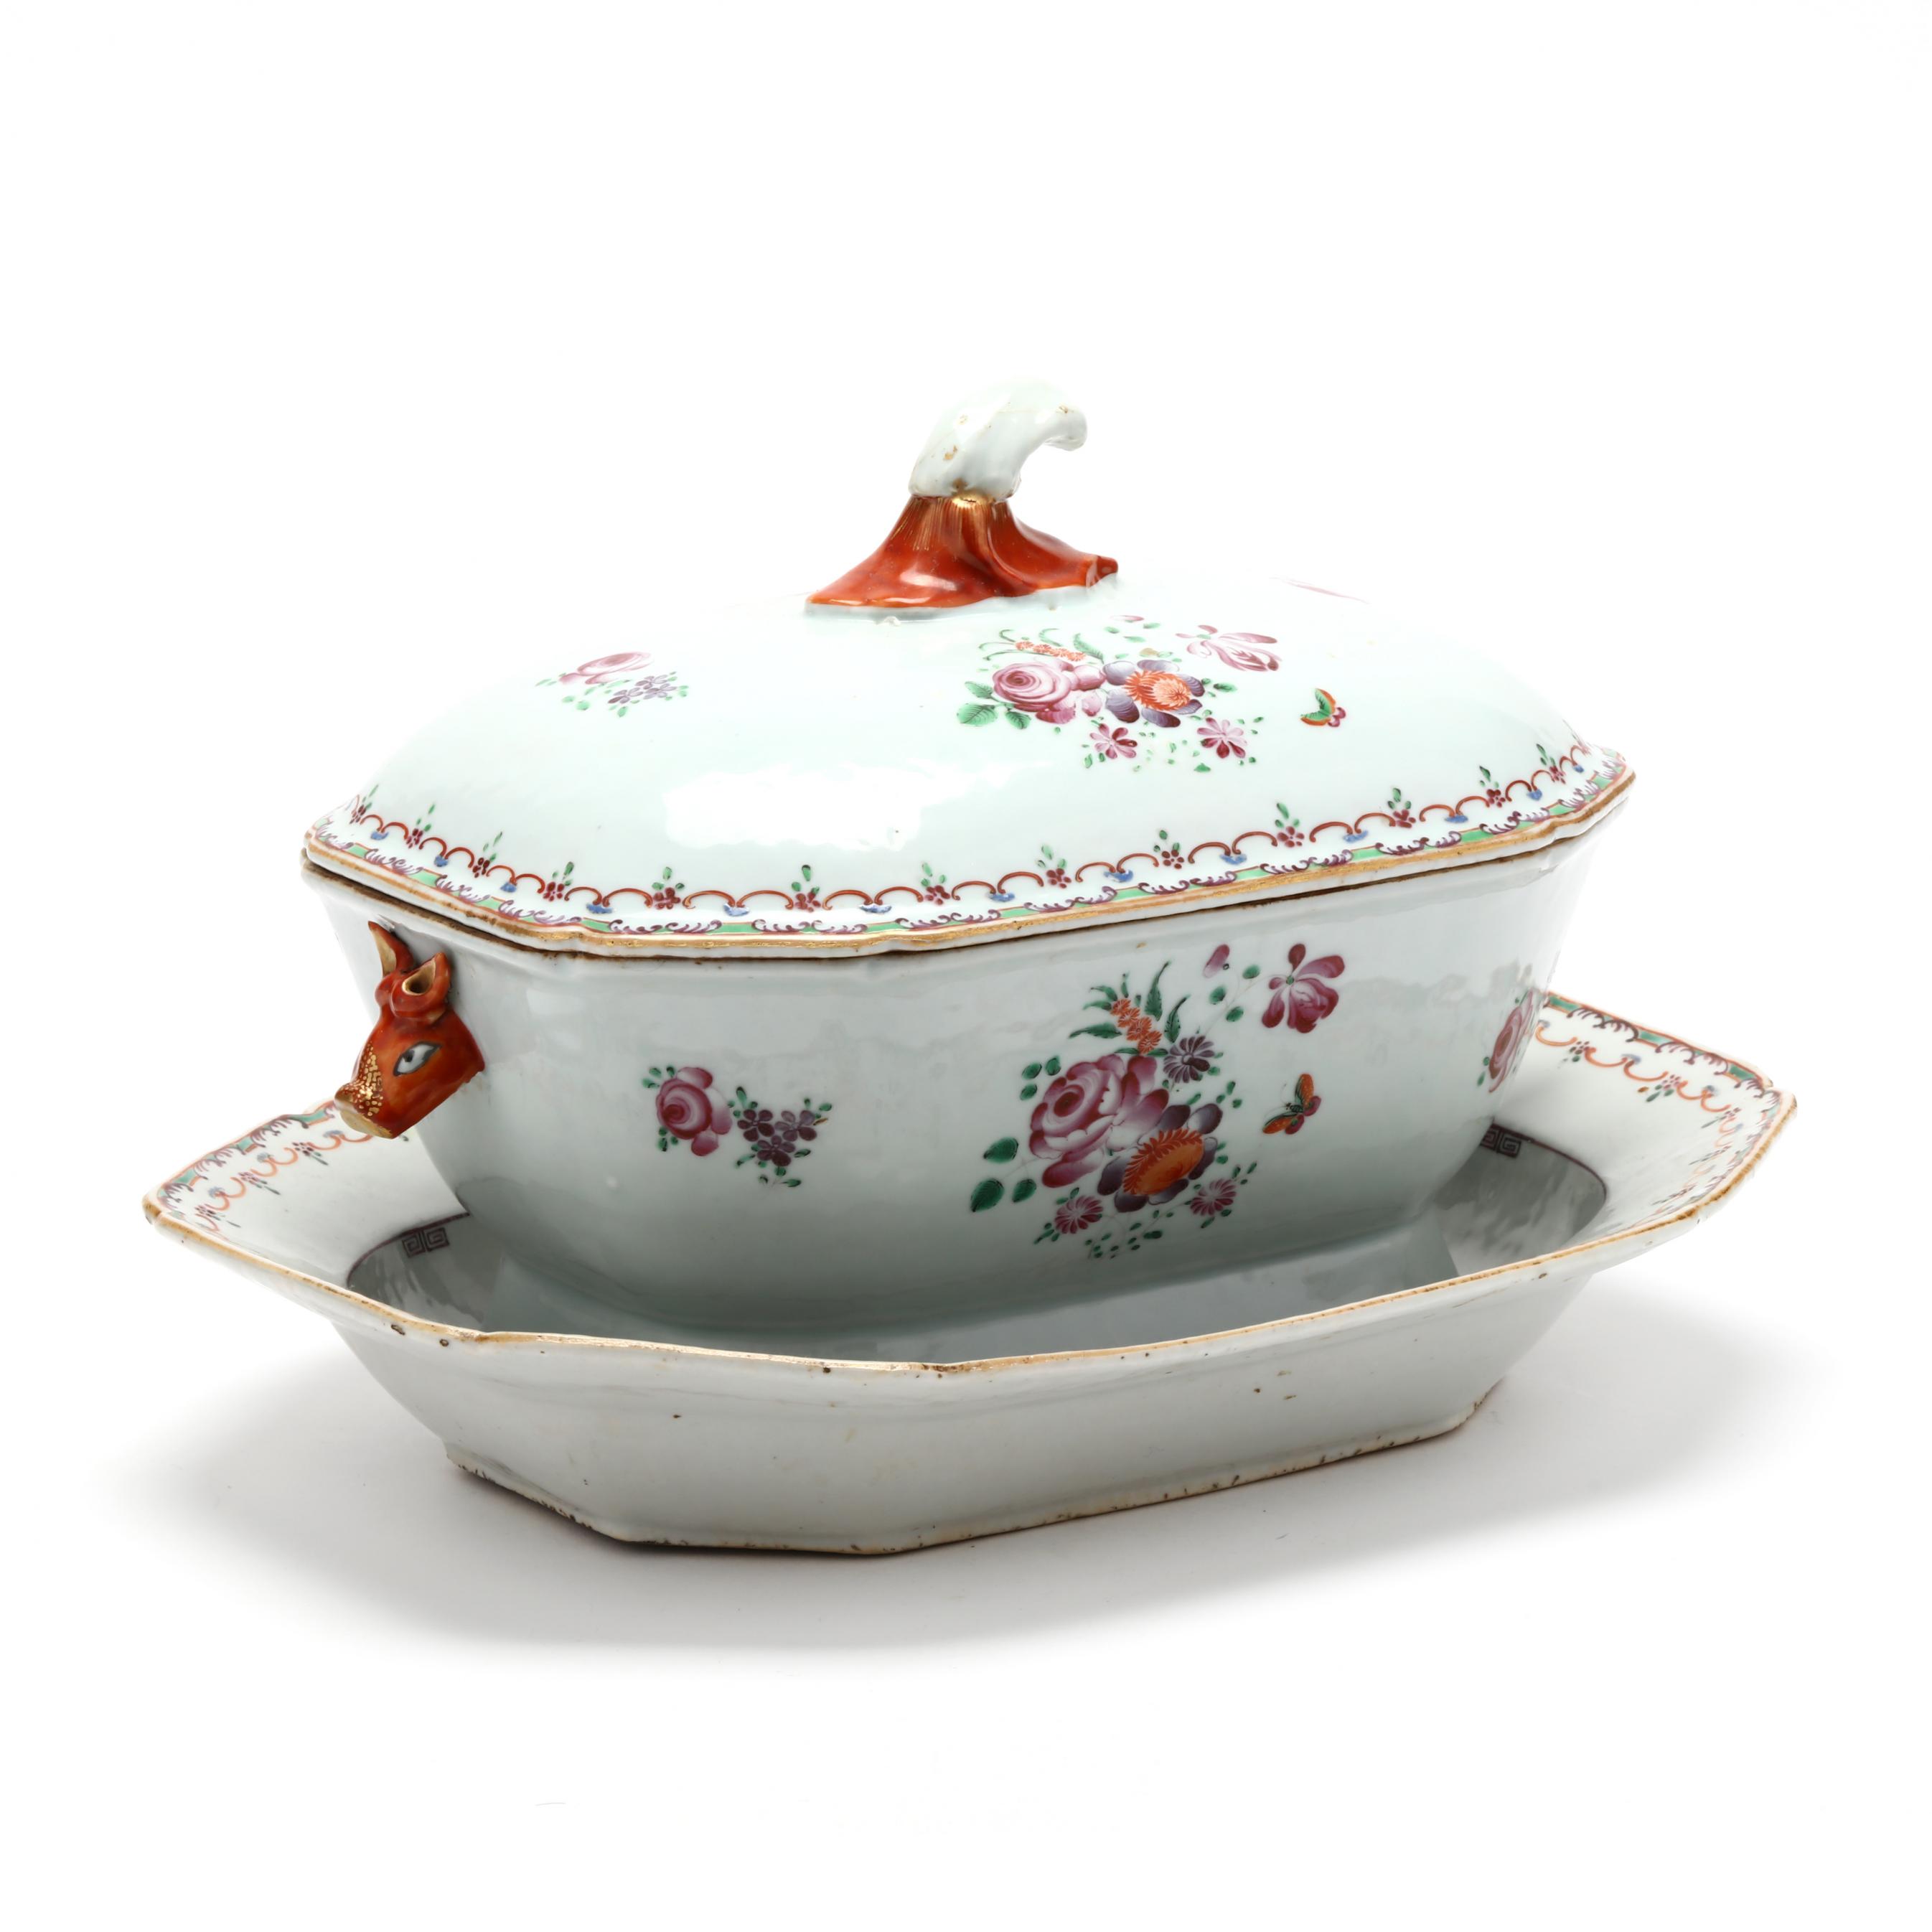 Sold at Auction: Chinese porcelain soup tureen